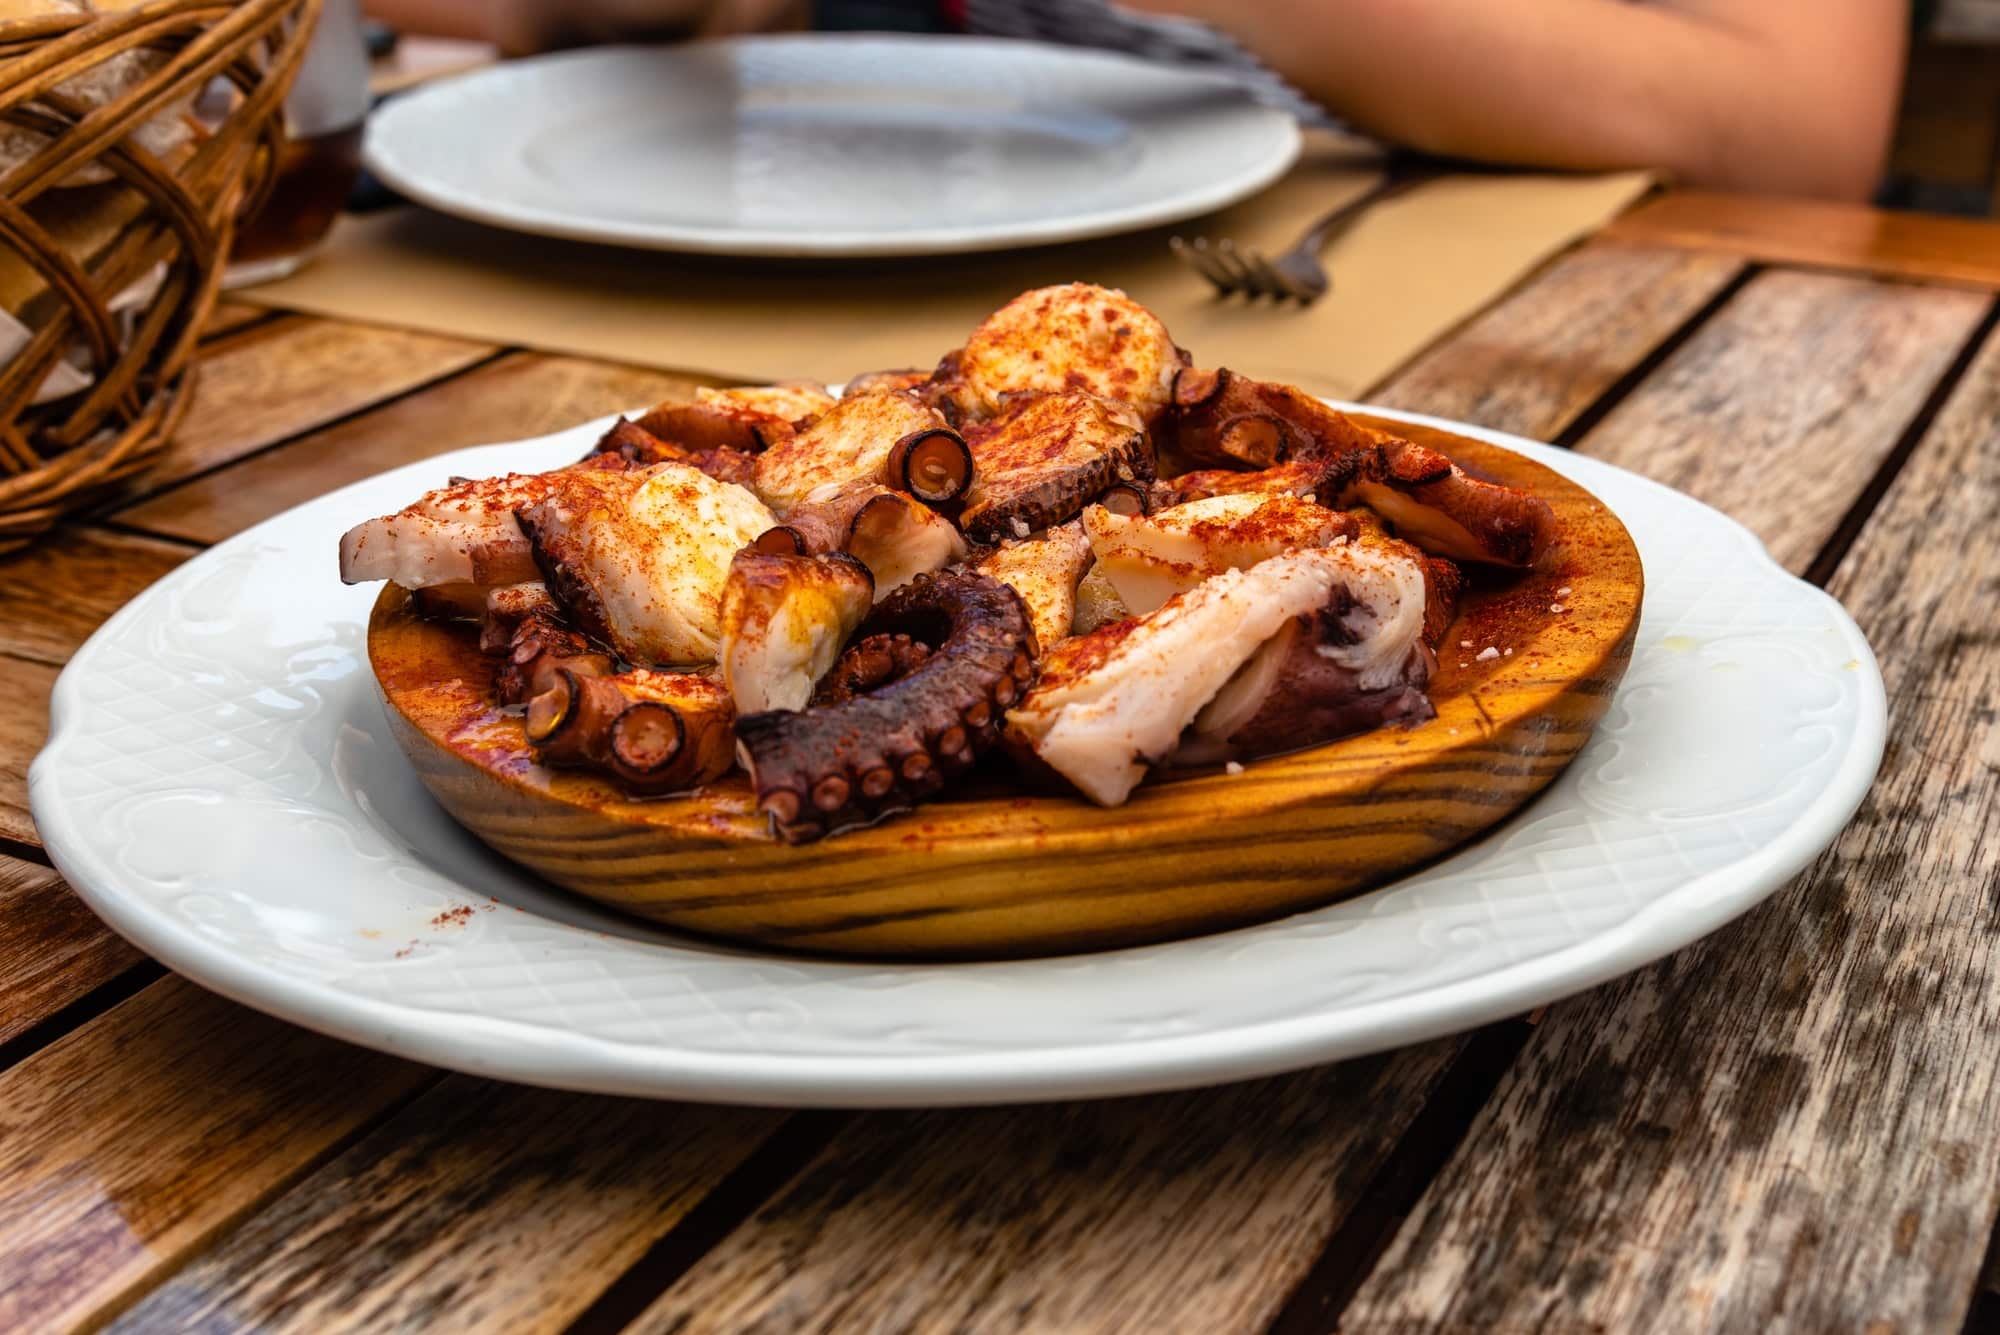 Galician style octopus with paprika, potatoes and olive oil in restaurant